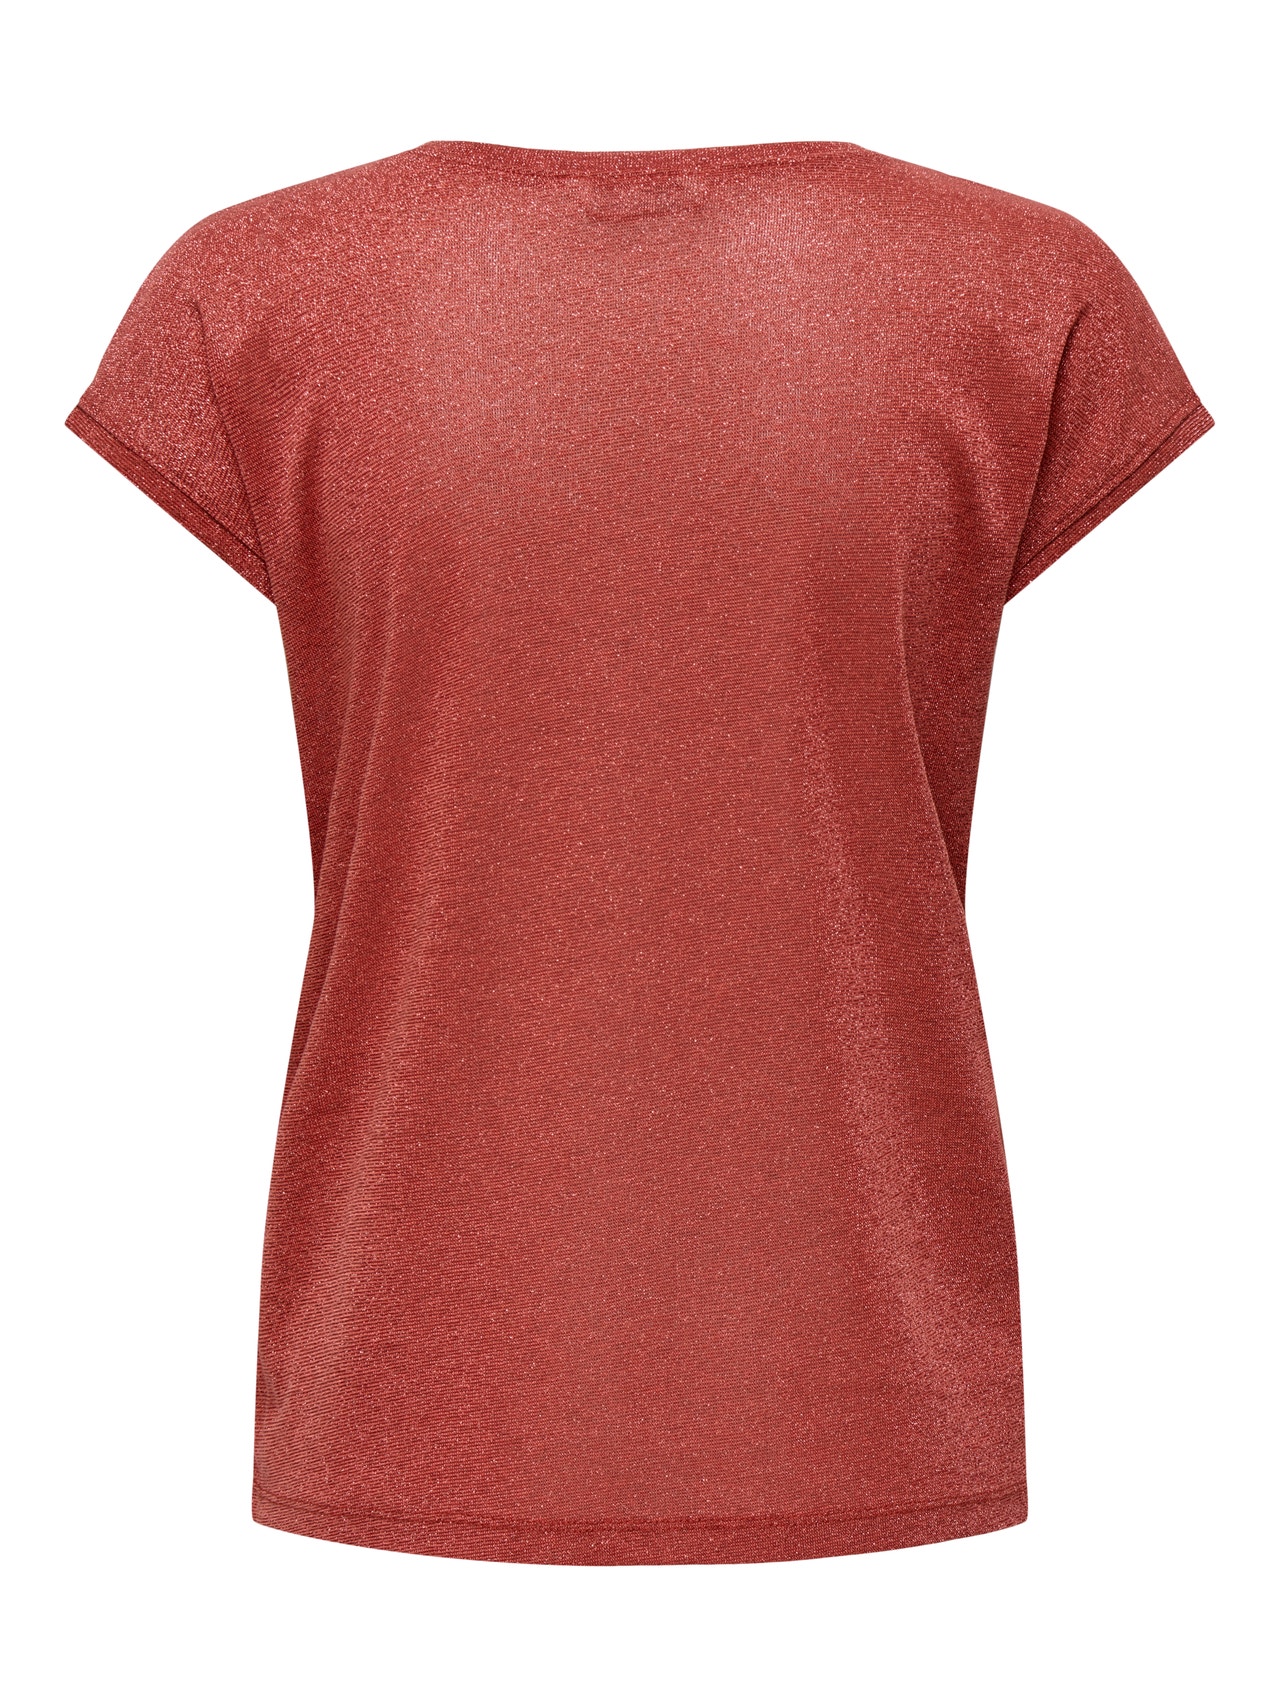 ONLY Loose Fit Round Neck Top -Cayenne - 15136069